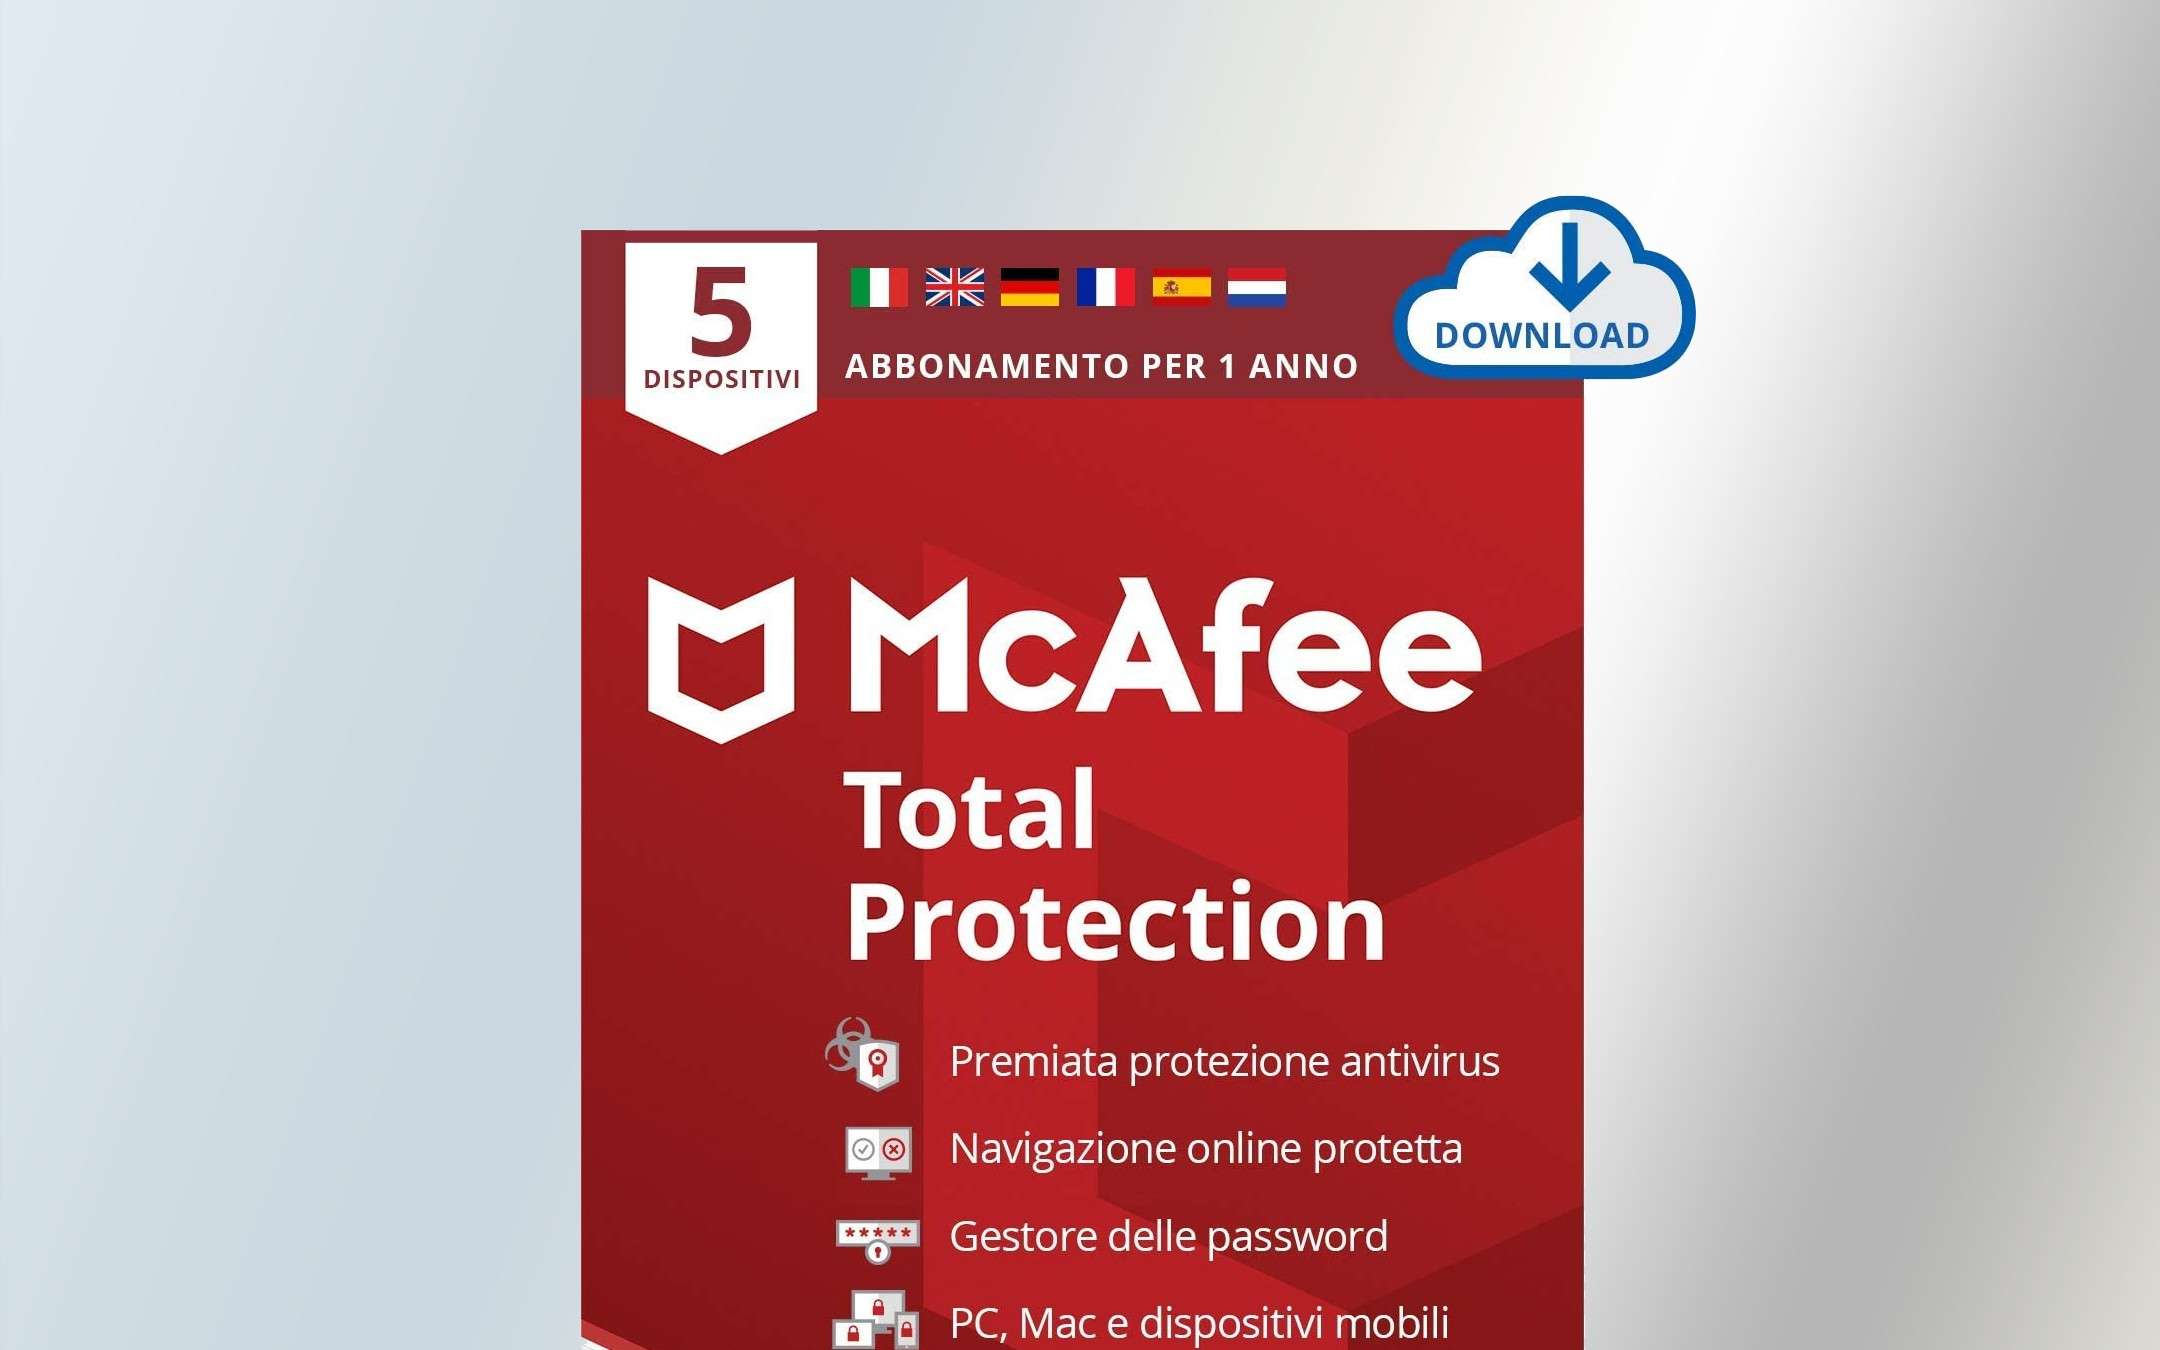 McAfee Antivirus, only today discounted up to -67%